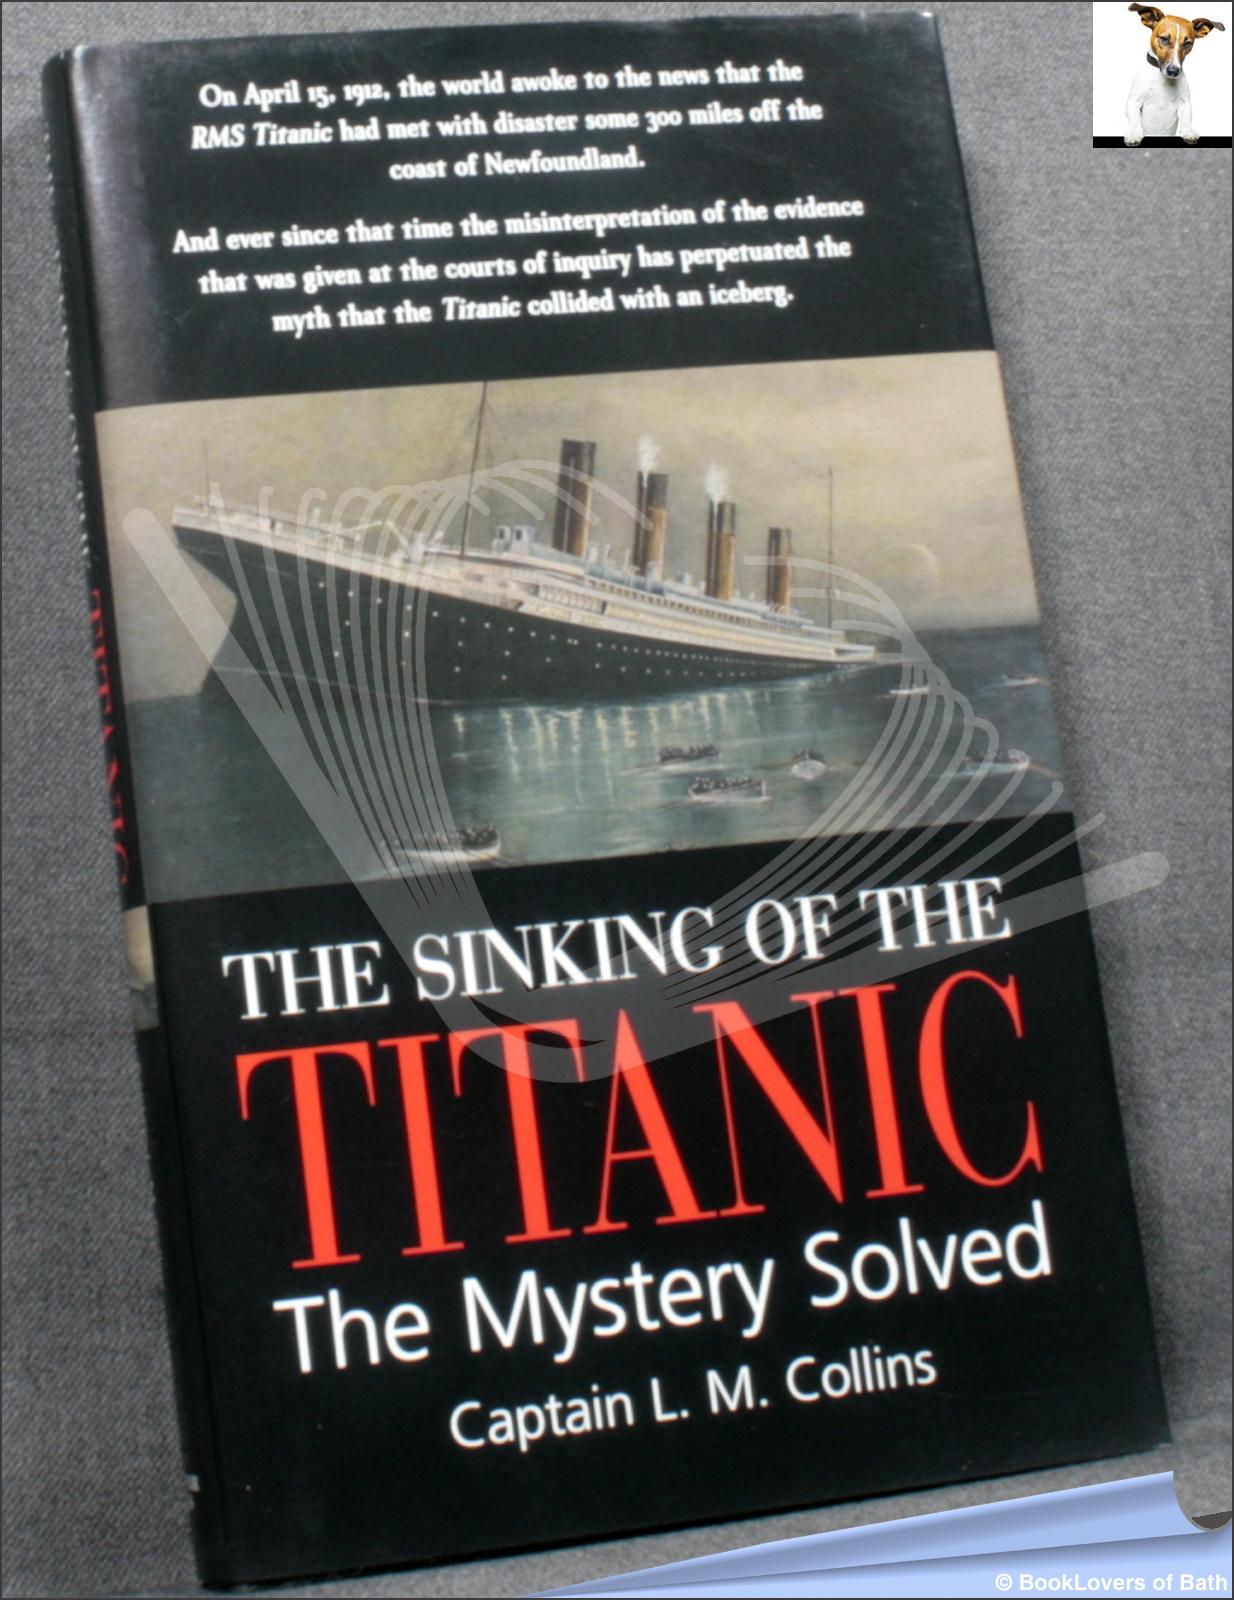 The Sinking of the Titanic: The Mystery Solved - Captain L. M. Collins